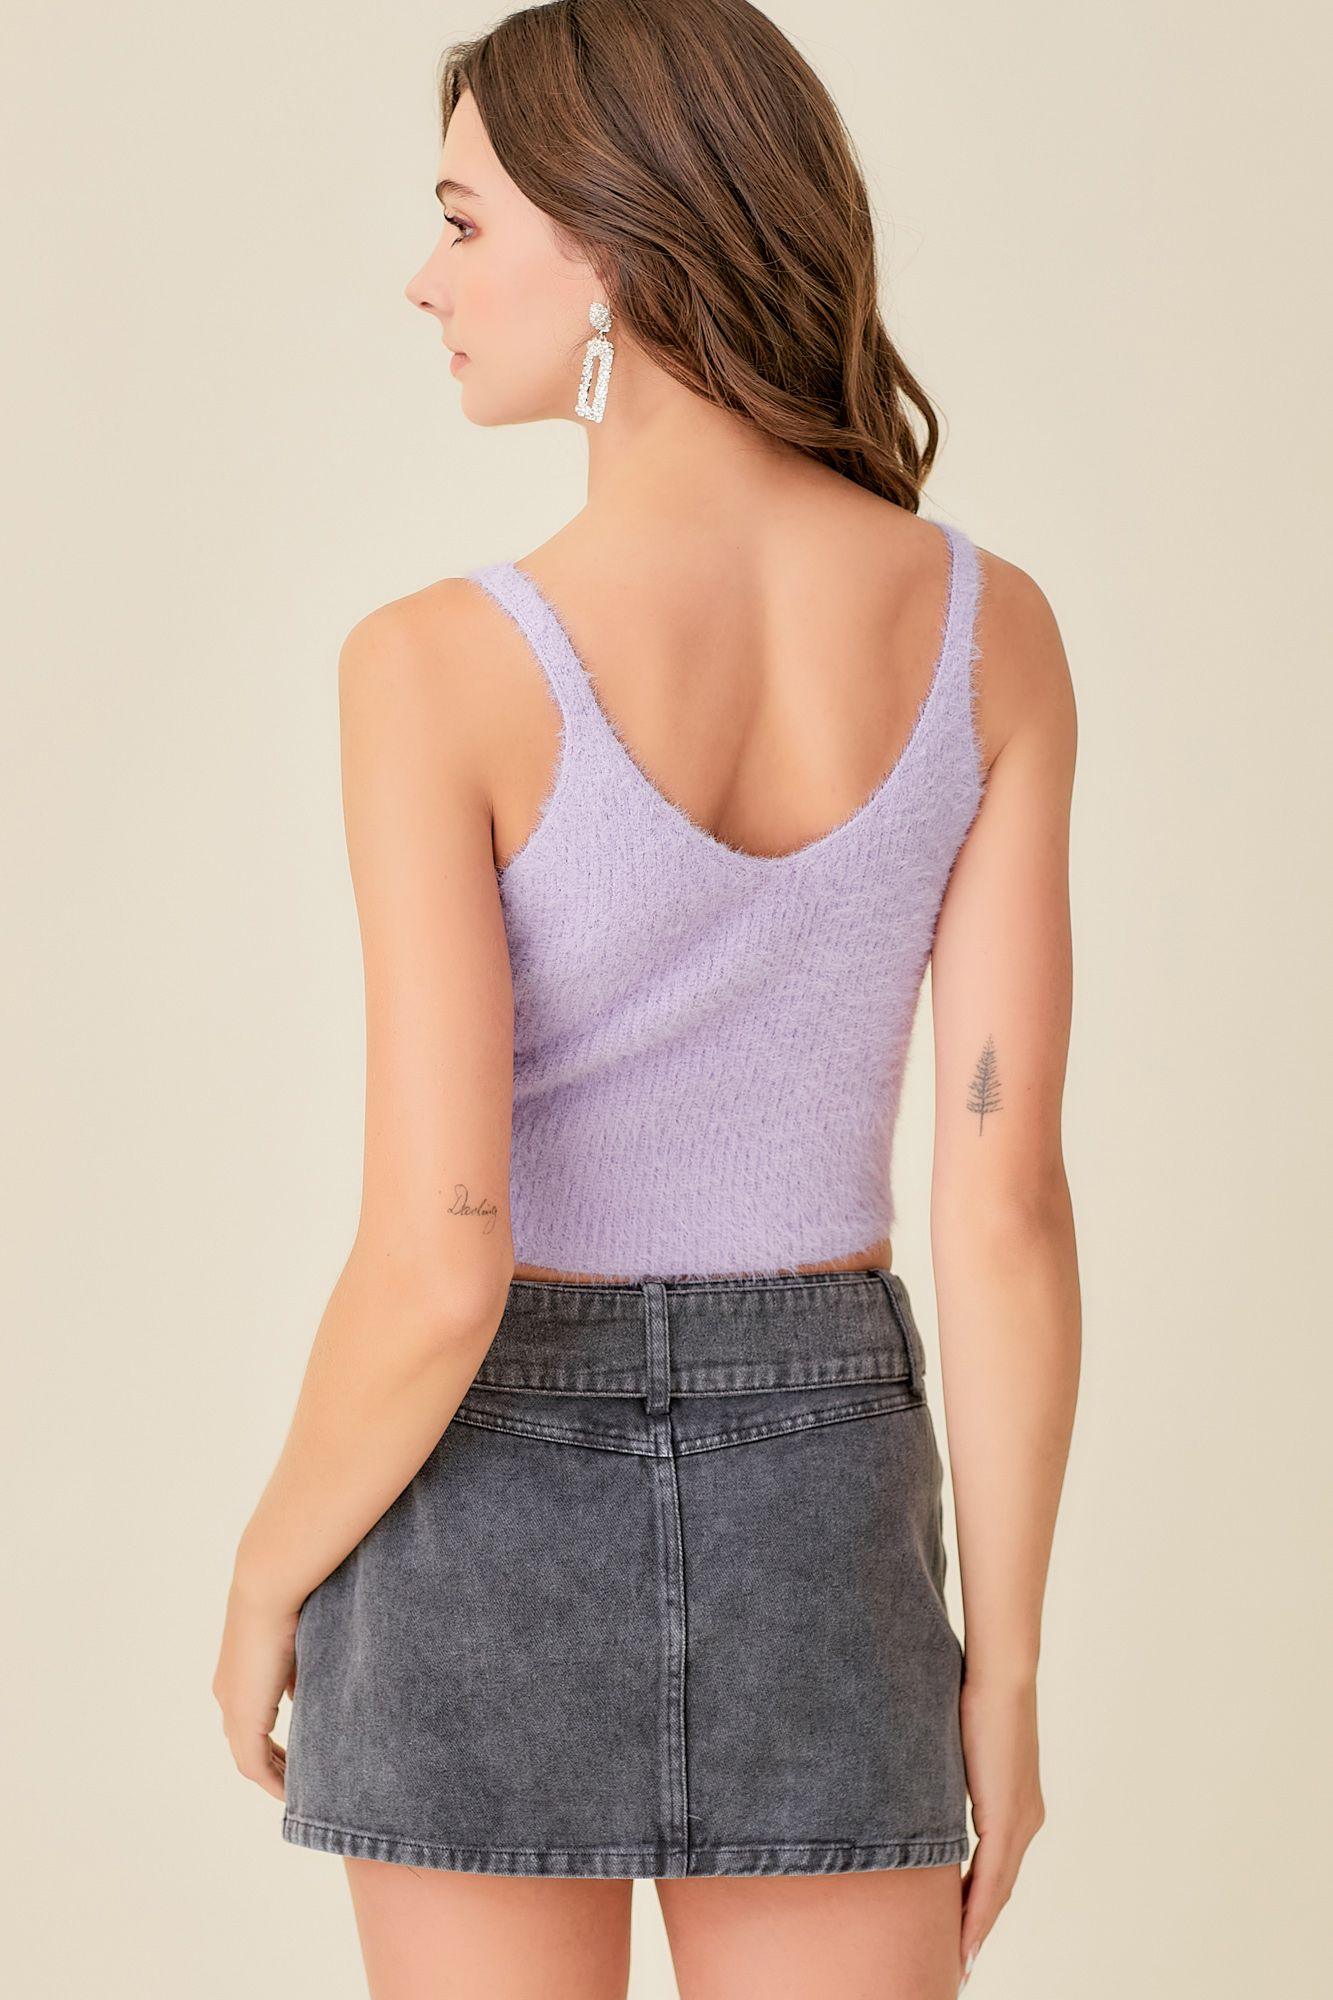 Olive and Bette's - Fuzzy Sweater Crop Top - Soft Lilac - Olive & Bette's